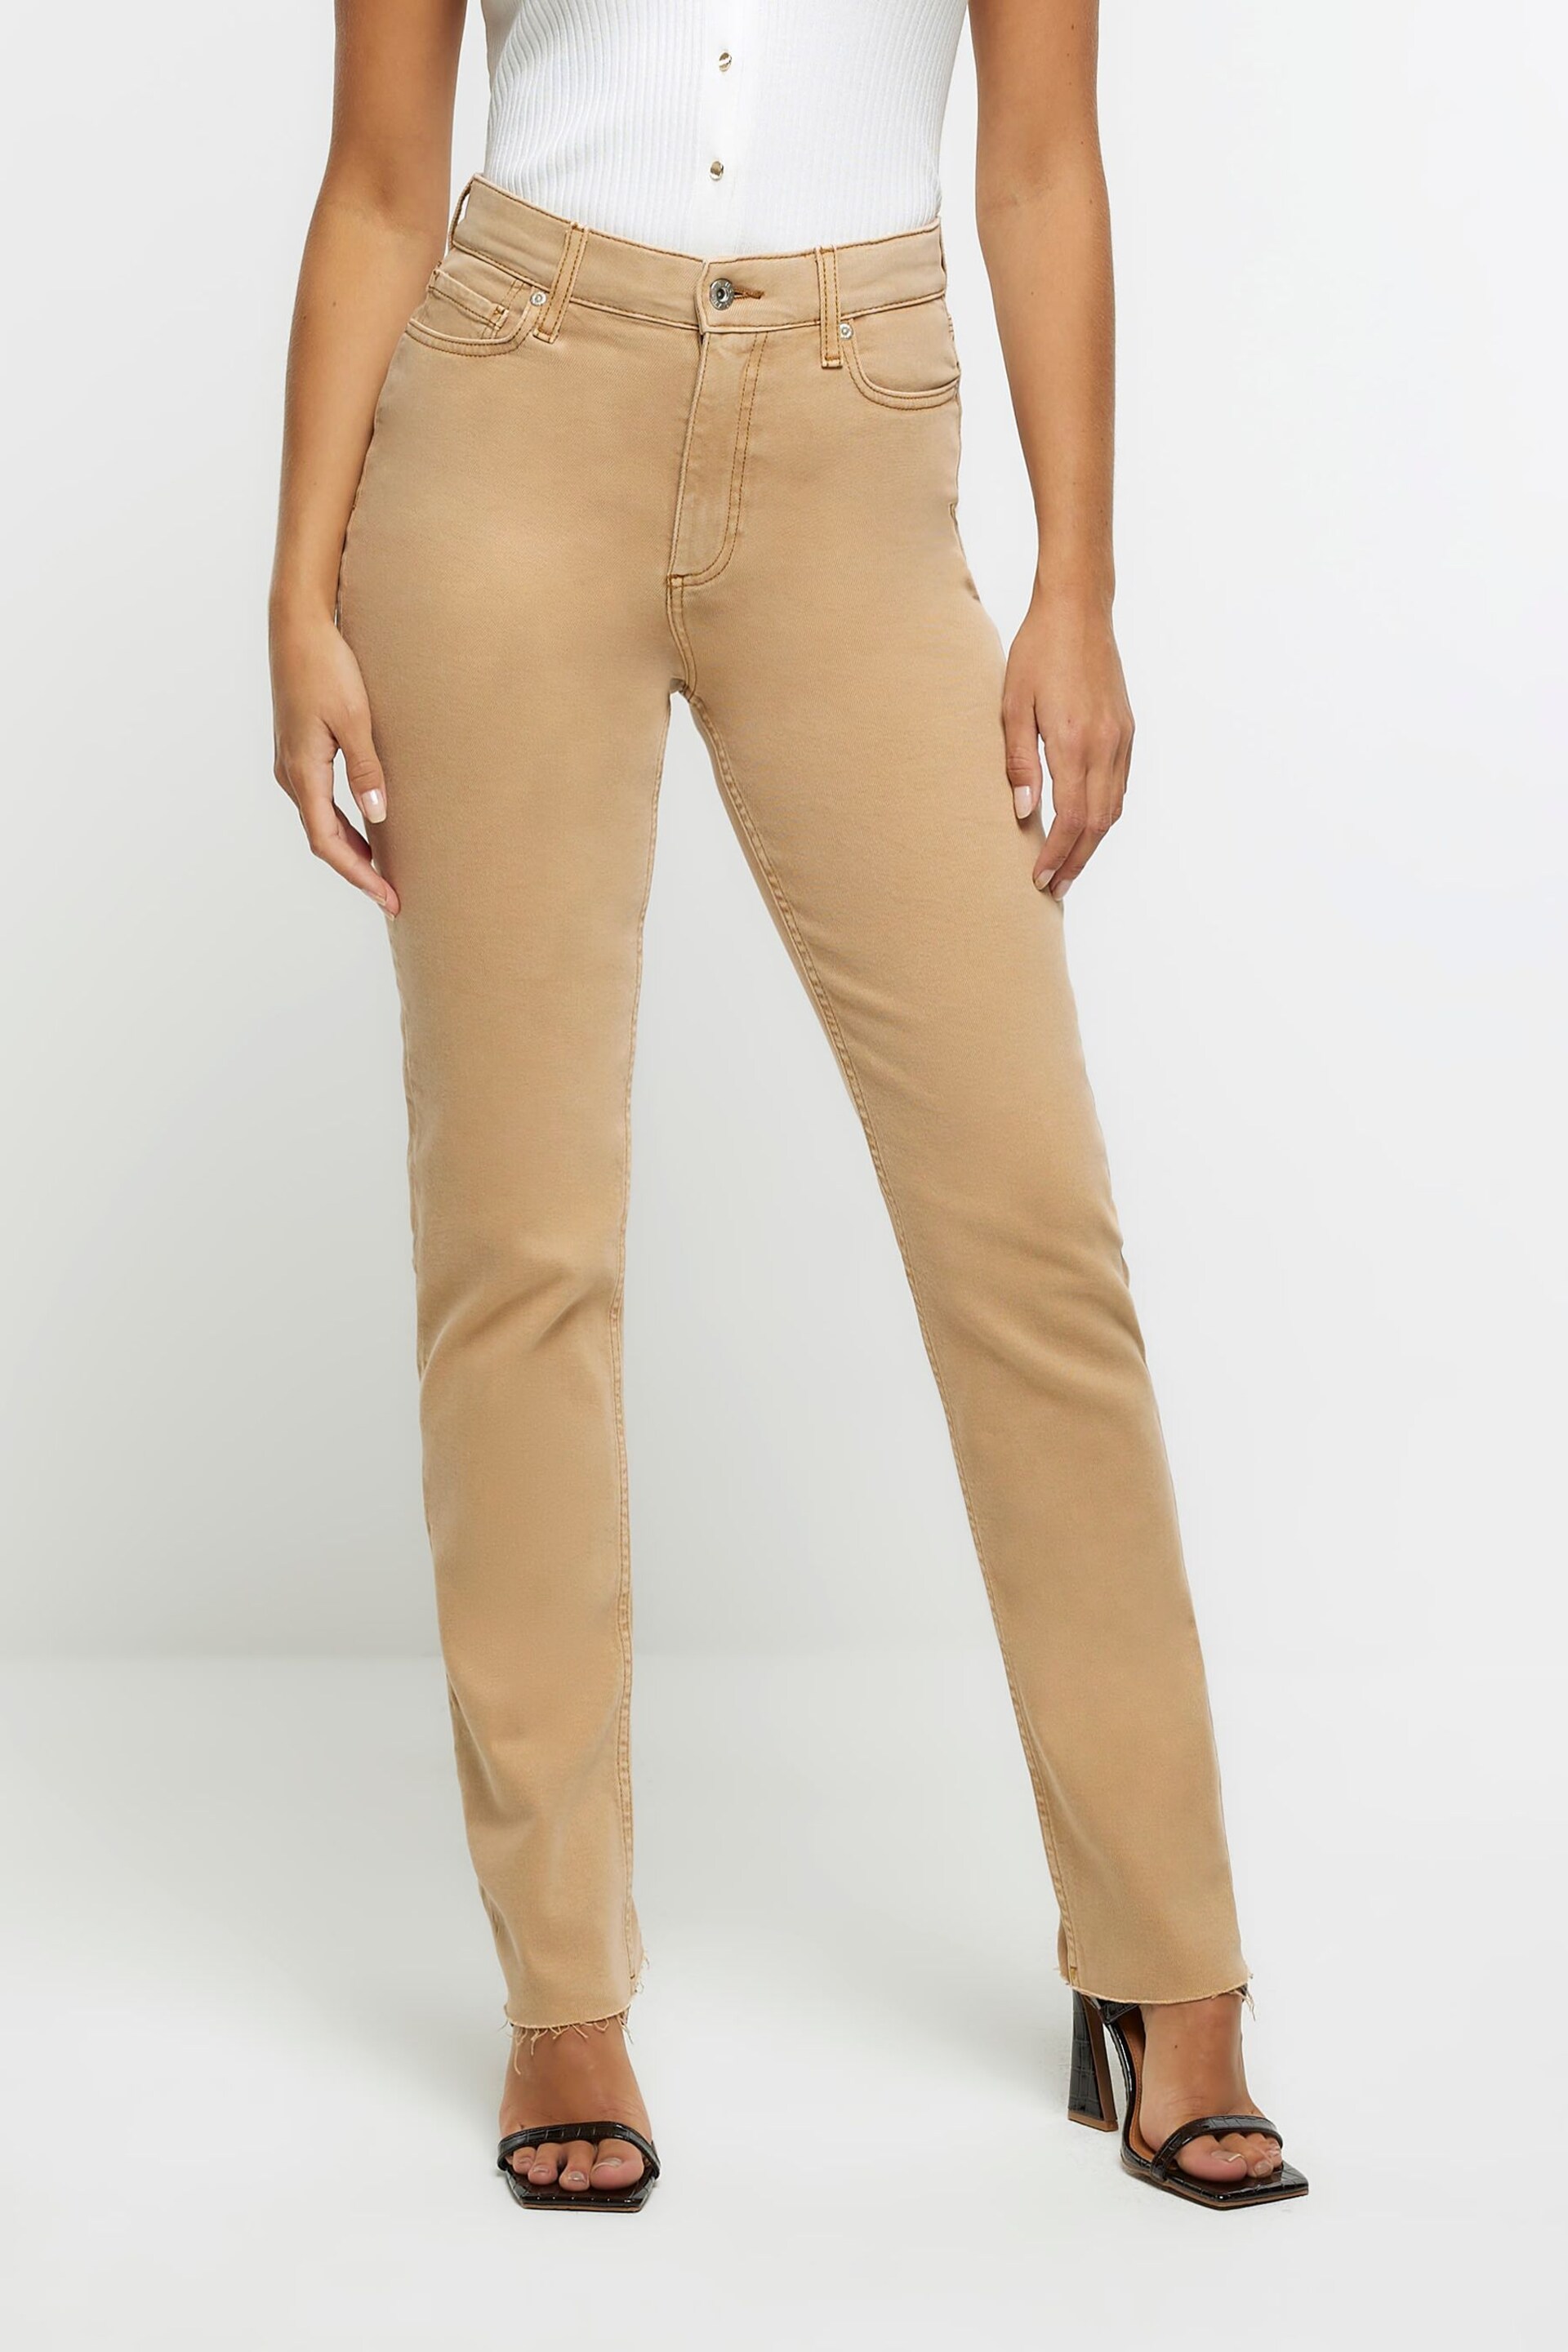 River Island Gold River Island Petite Gold Jeans - Image 1 of 4